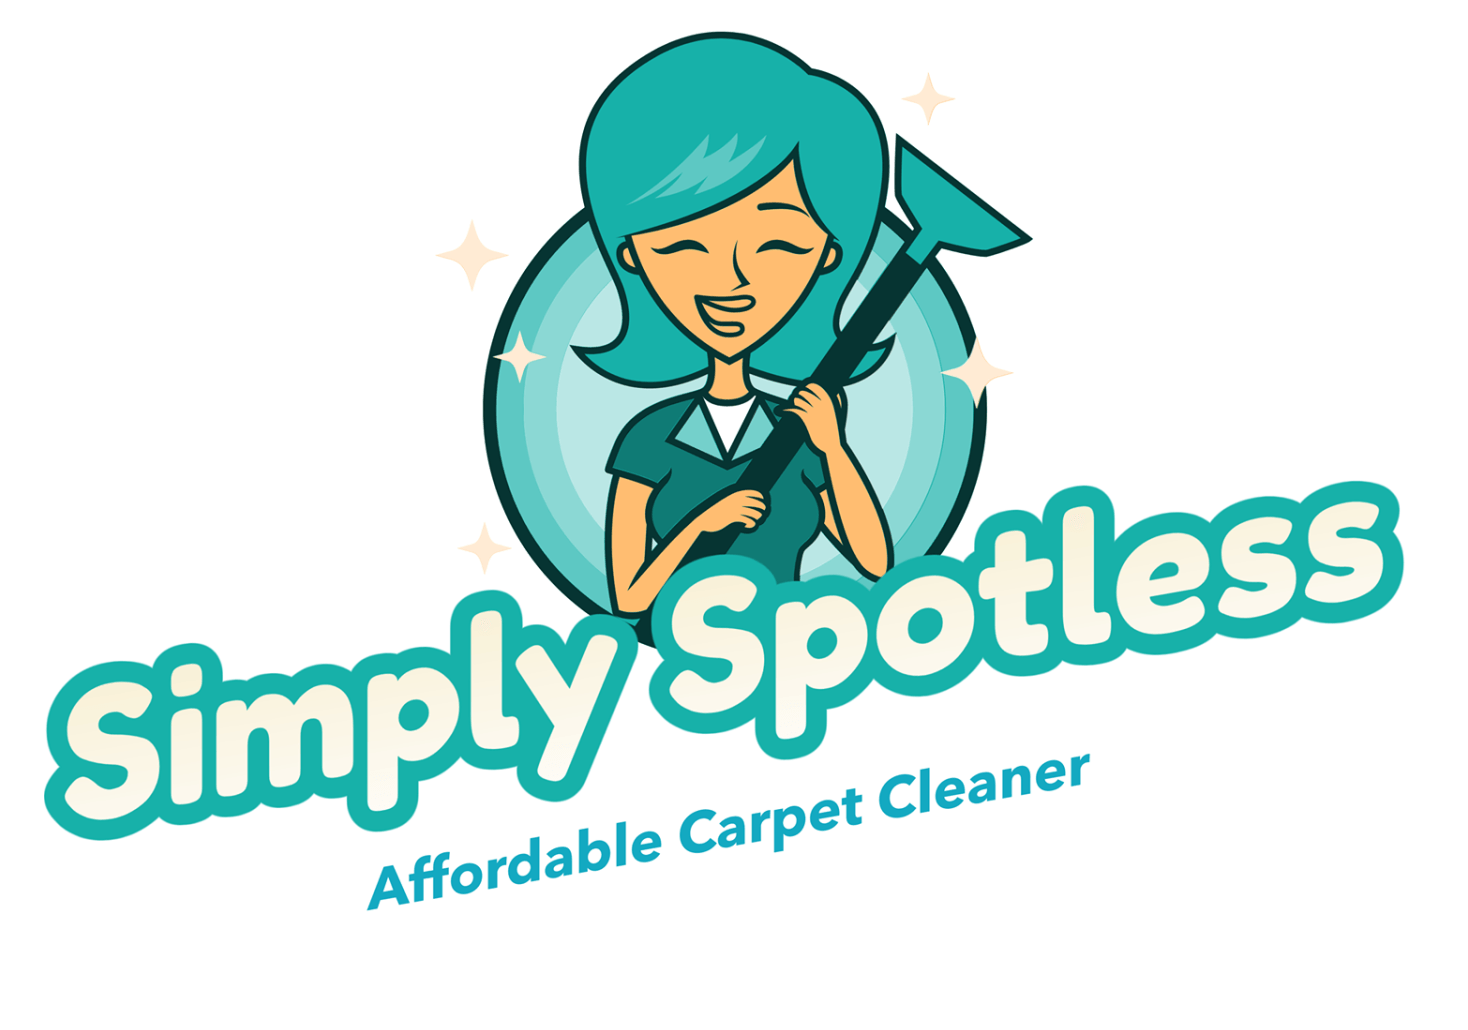 Simply Spotless Carpet and Upholstery Cleaning, LLC